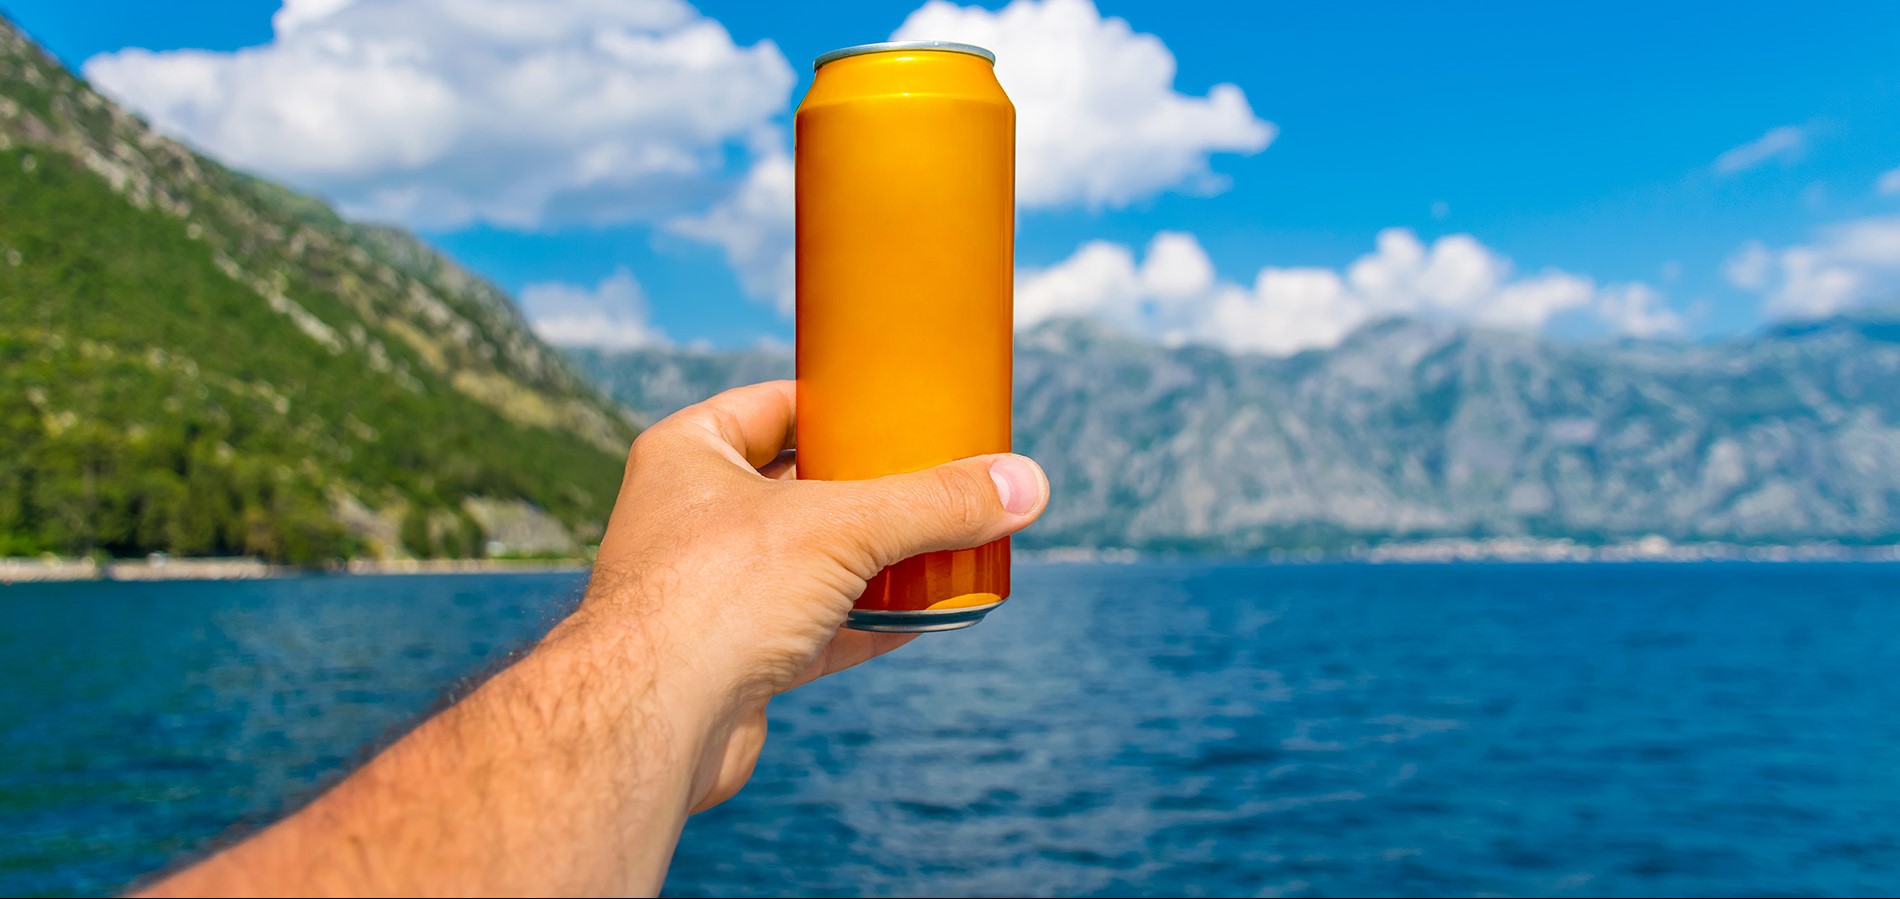 Orange can being held up against a background with a lake and mountains.